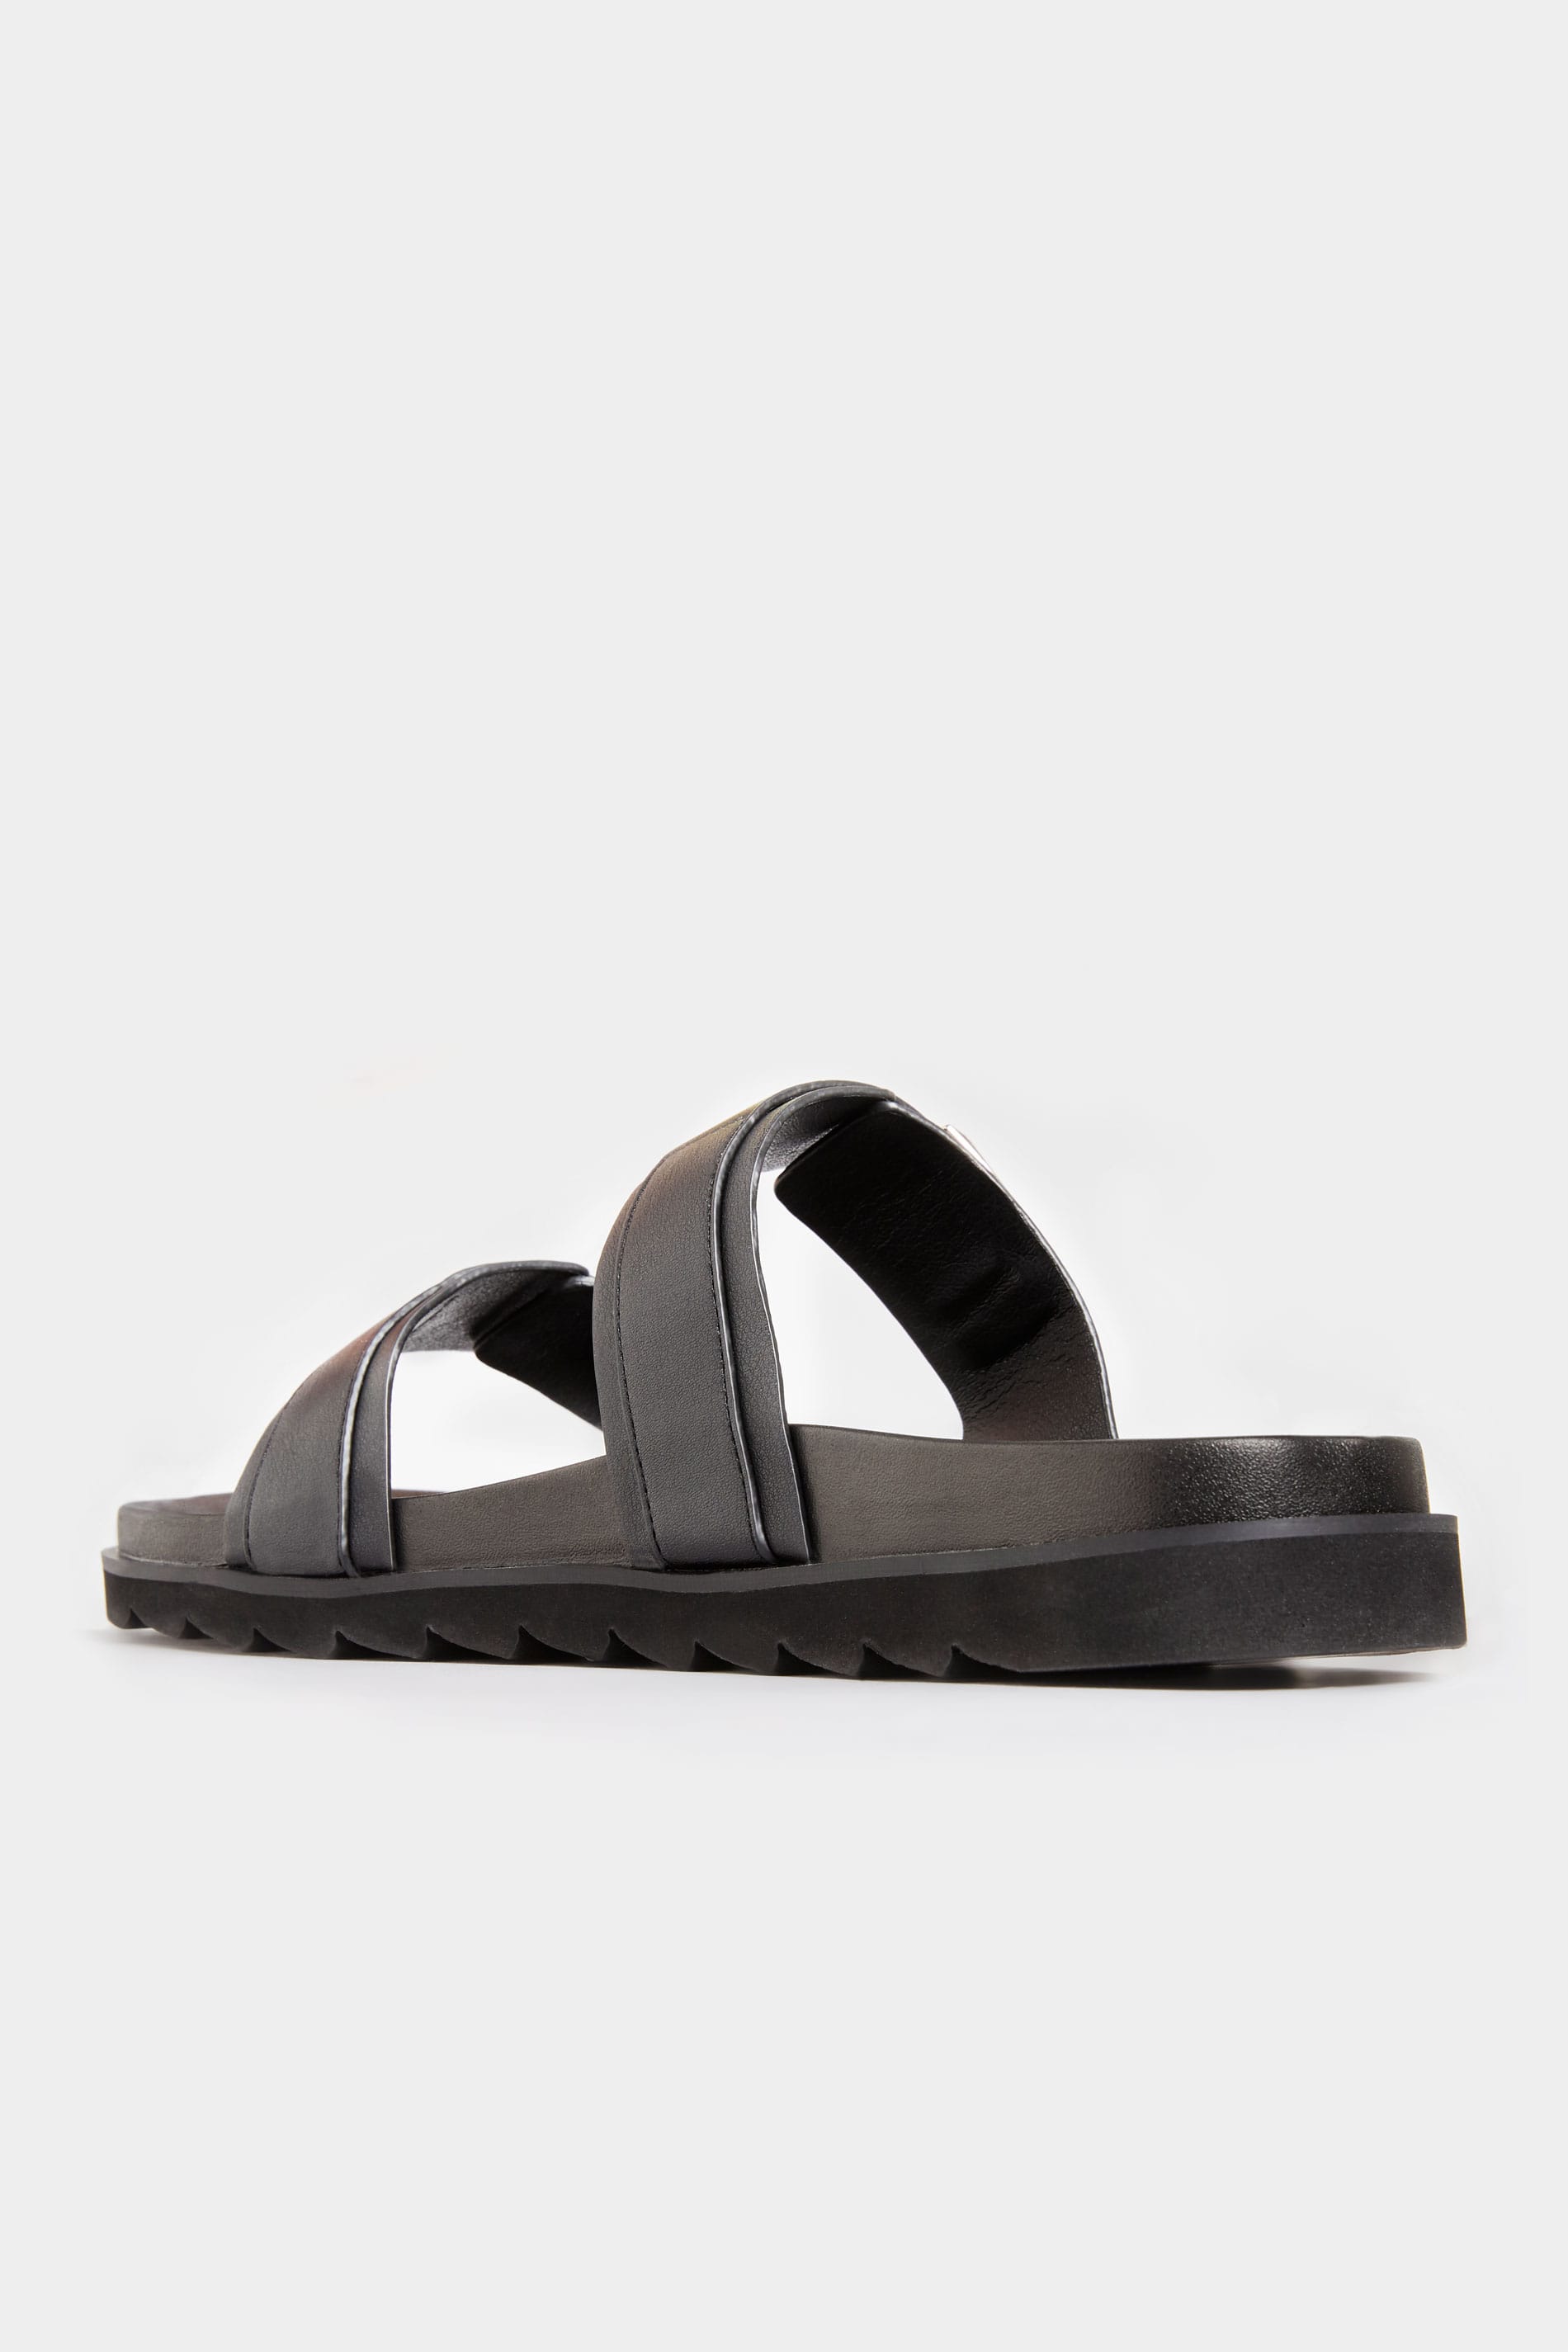 LIMITED COLLECTION Black Buckle Sliders In Extra Wide Fit | Yours Clothing